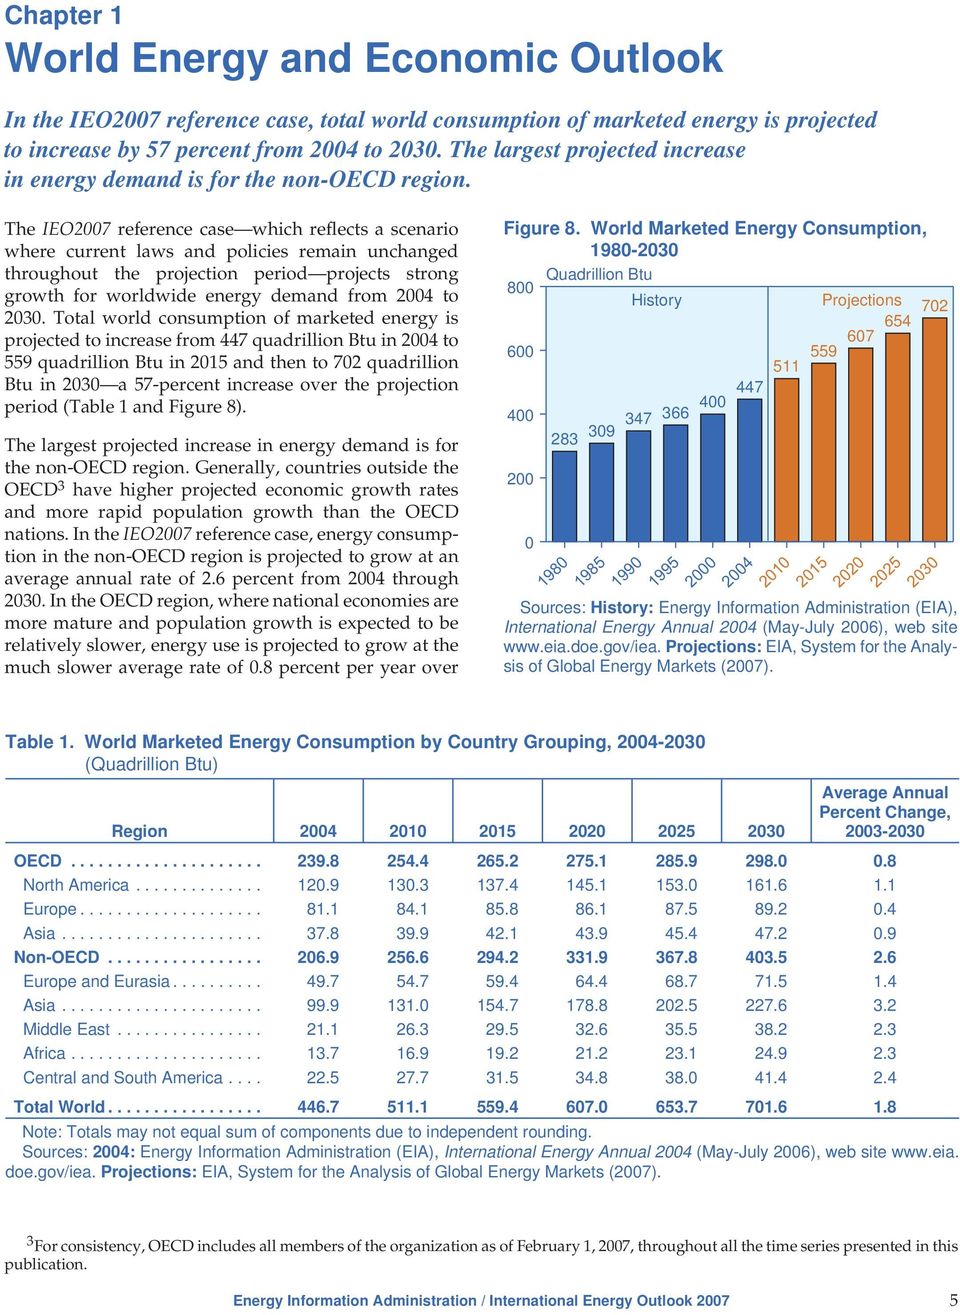 The IEO2007 reference case which reflects a scenario where current laws and policies remain unchanged throughout the projection period projects strong growth for worldwide energy demand from 2004 to